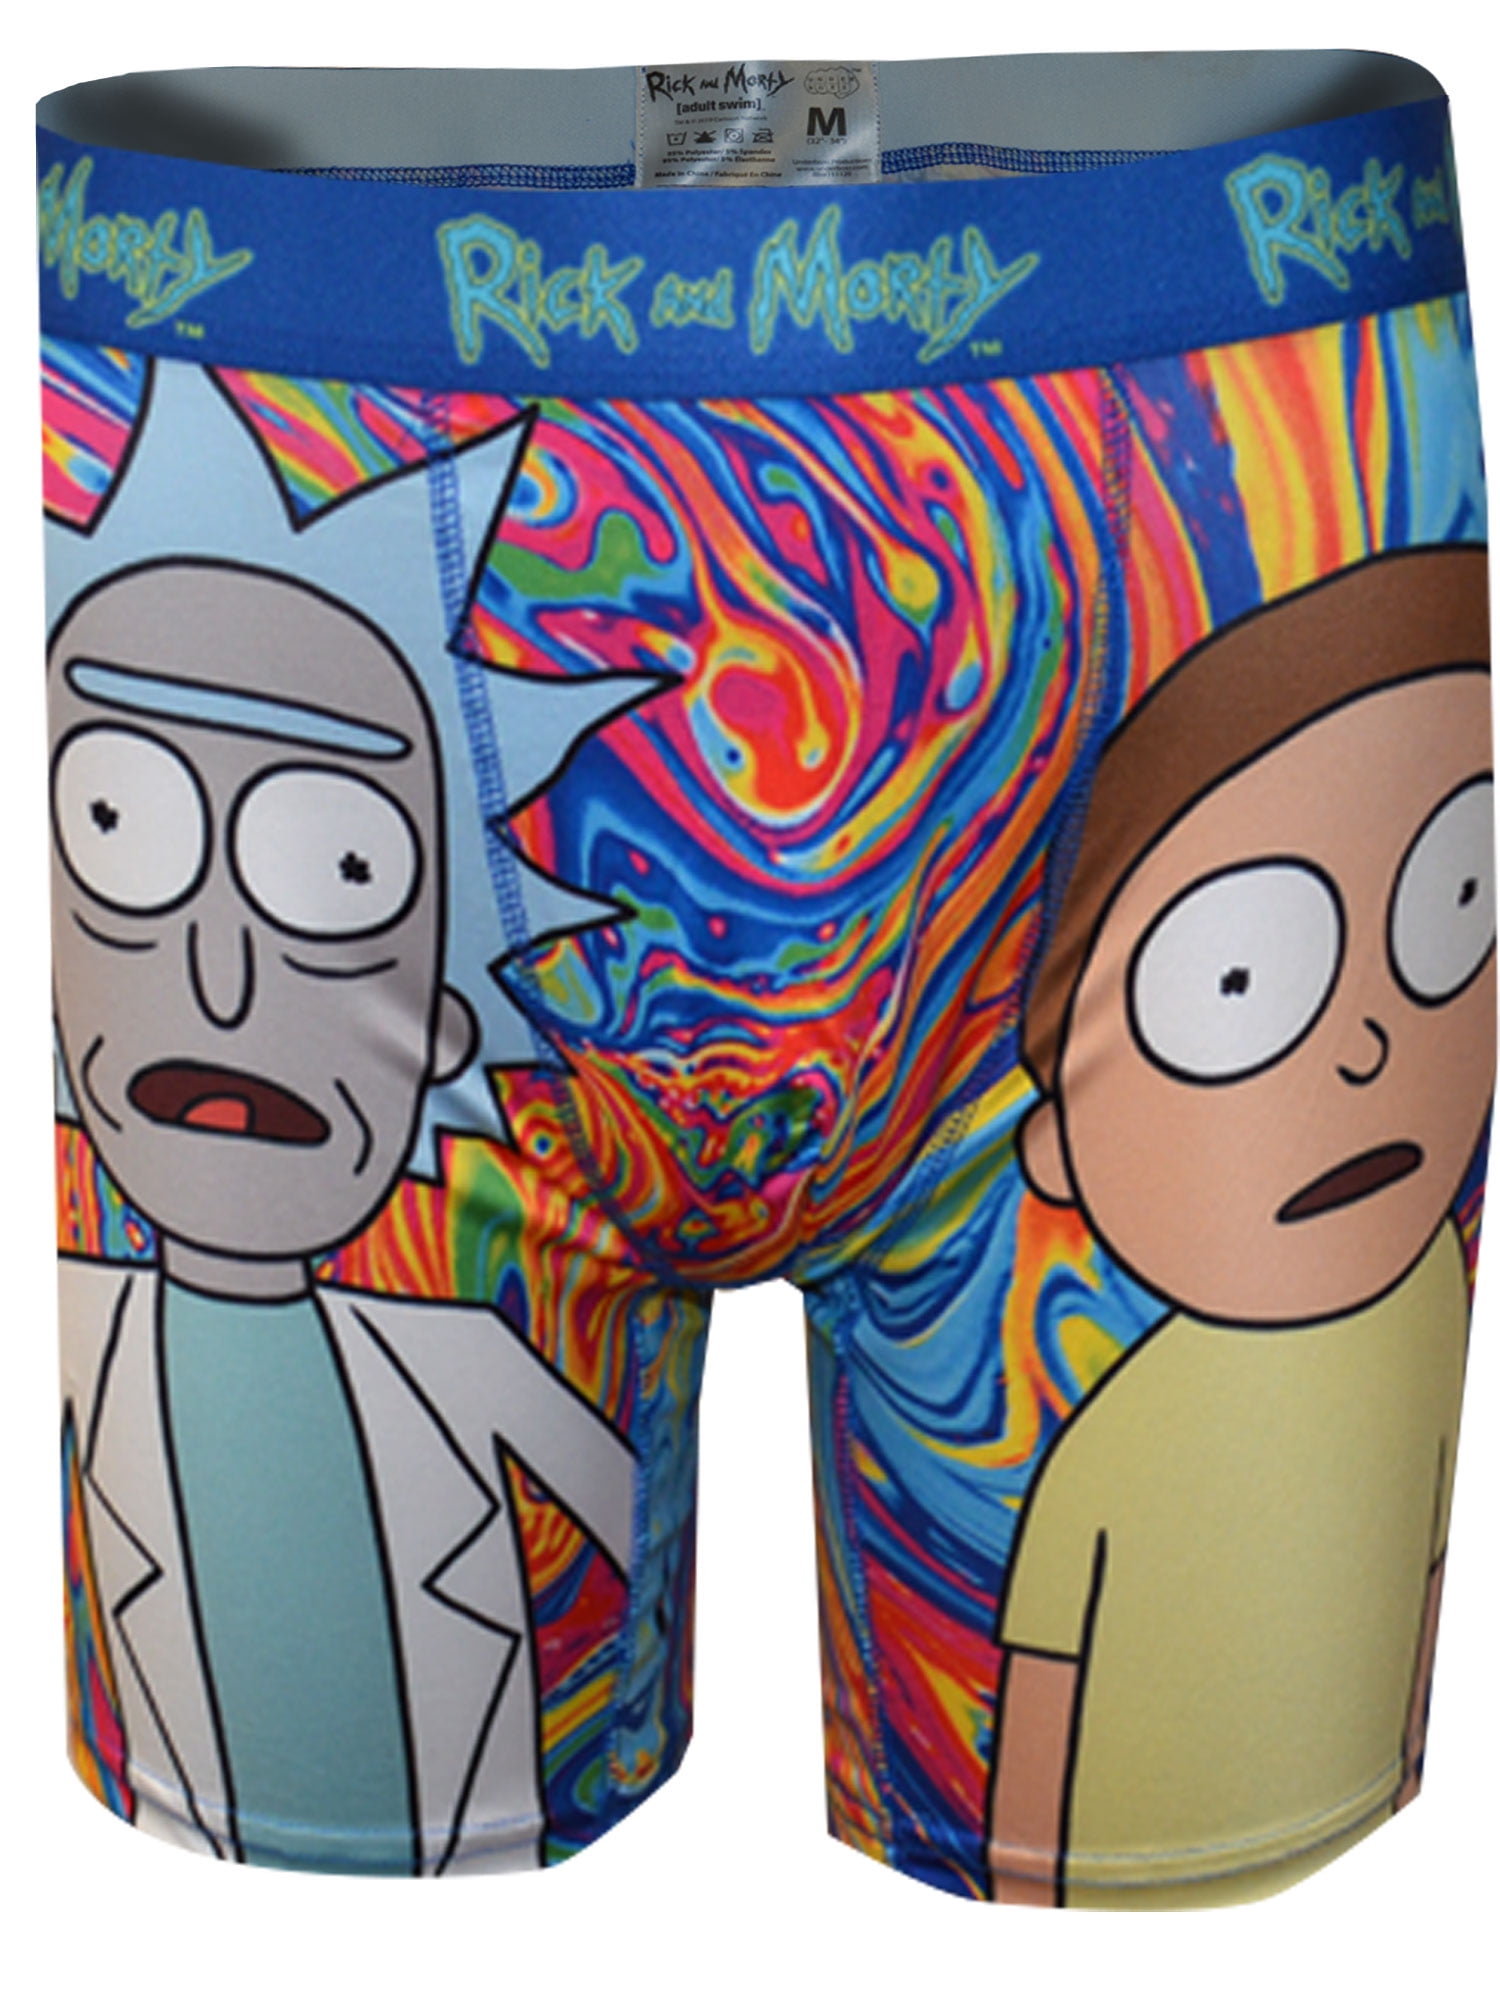 PO1 UP Rick & Morty Boxer Briefs Mens Short Underwear Get Schwifty Underpants with Soft Stretch Fabric and Elastic Belt